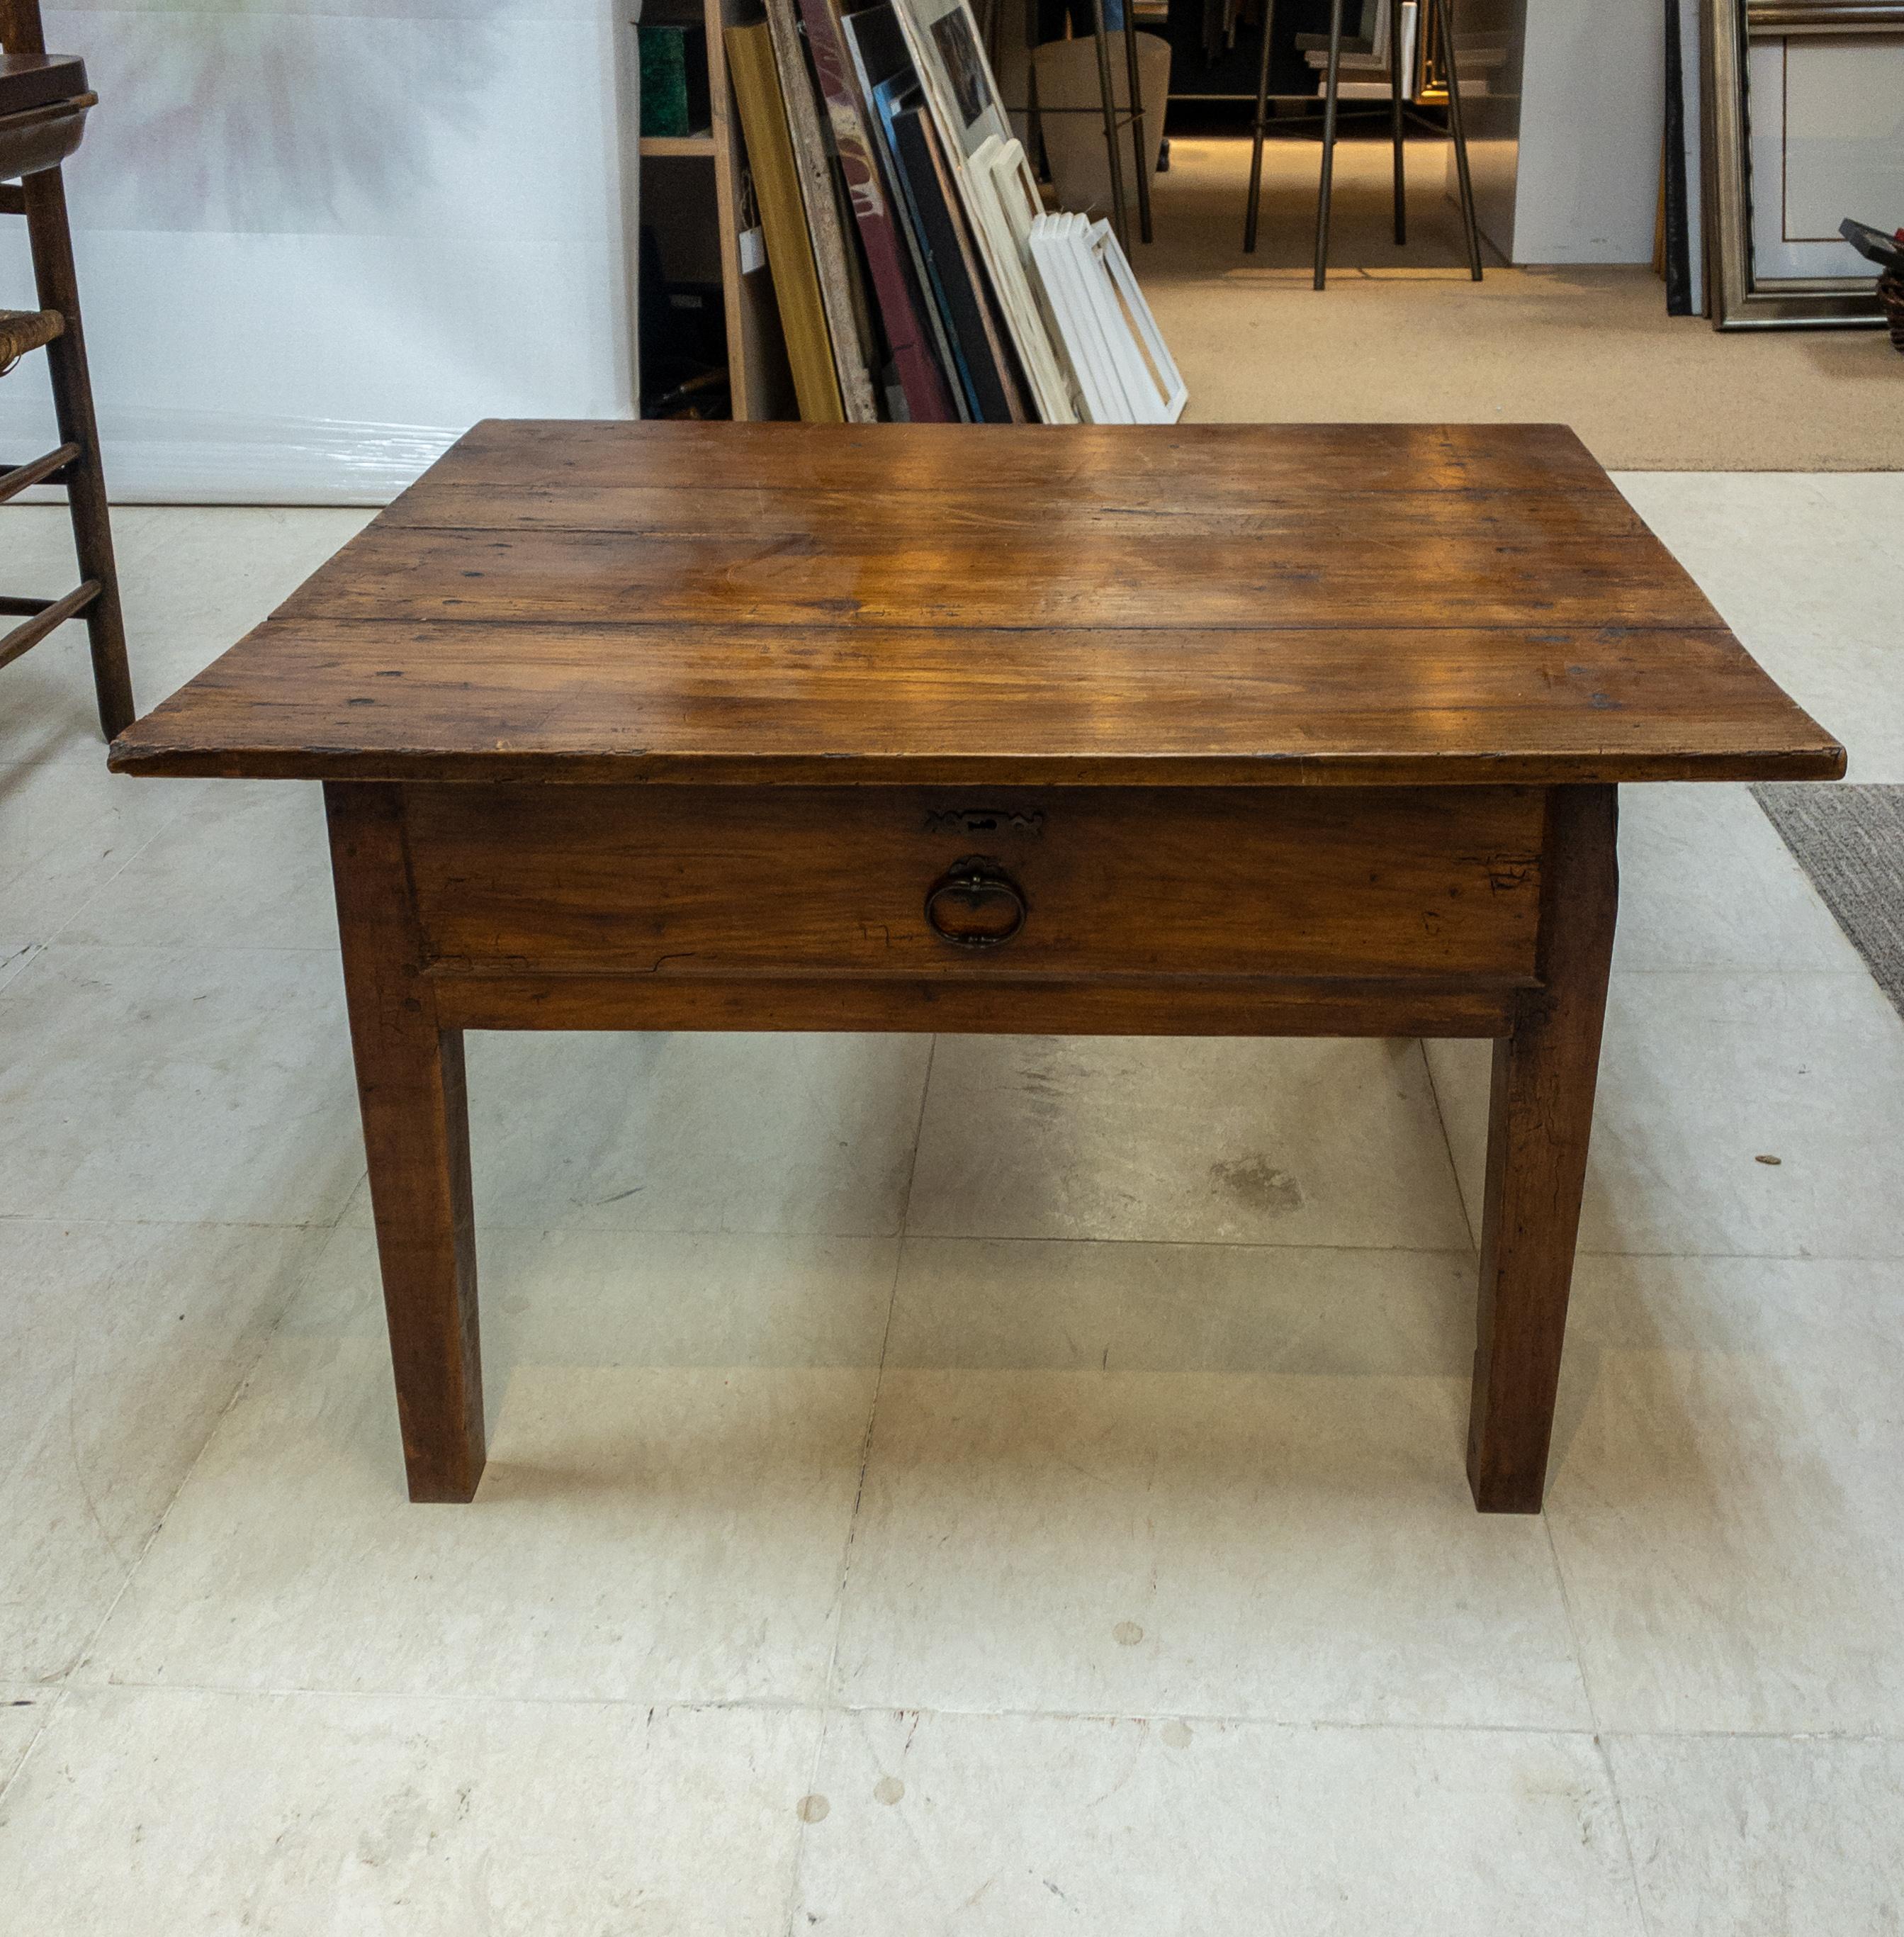 The 19th Century French Low Table epitomizes the fusion of practicality and elegance. Serving as a small yet versatile work table, it features a single drawer seamlessly incorporated into its design, providing convenient storage for essentials. With